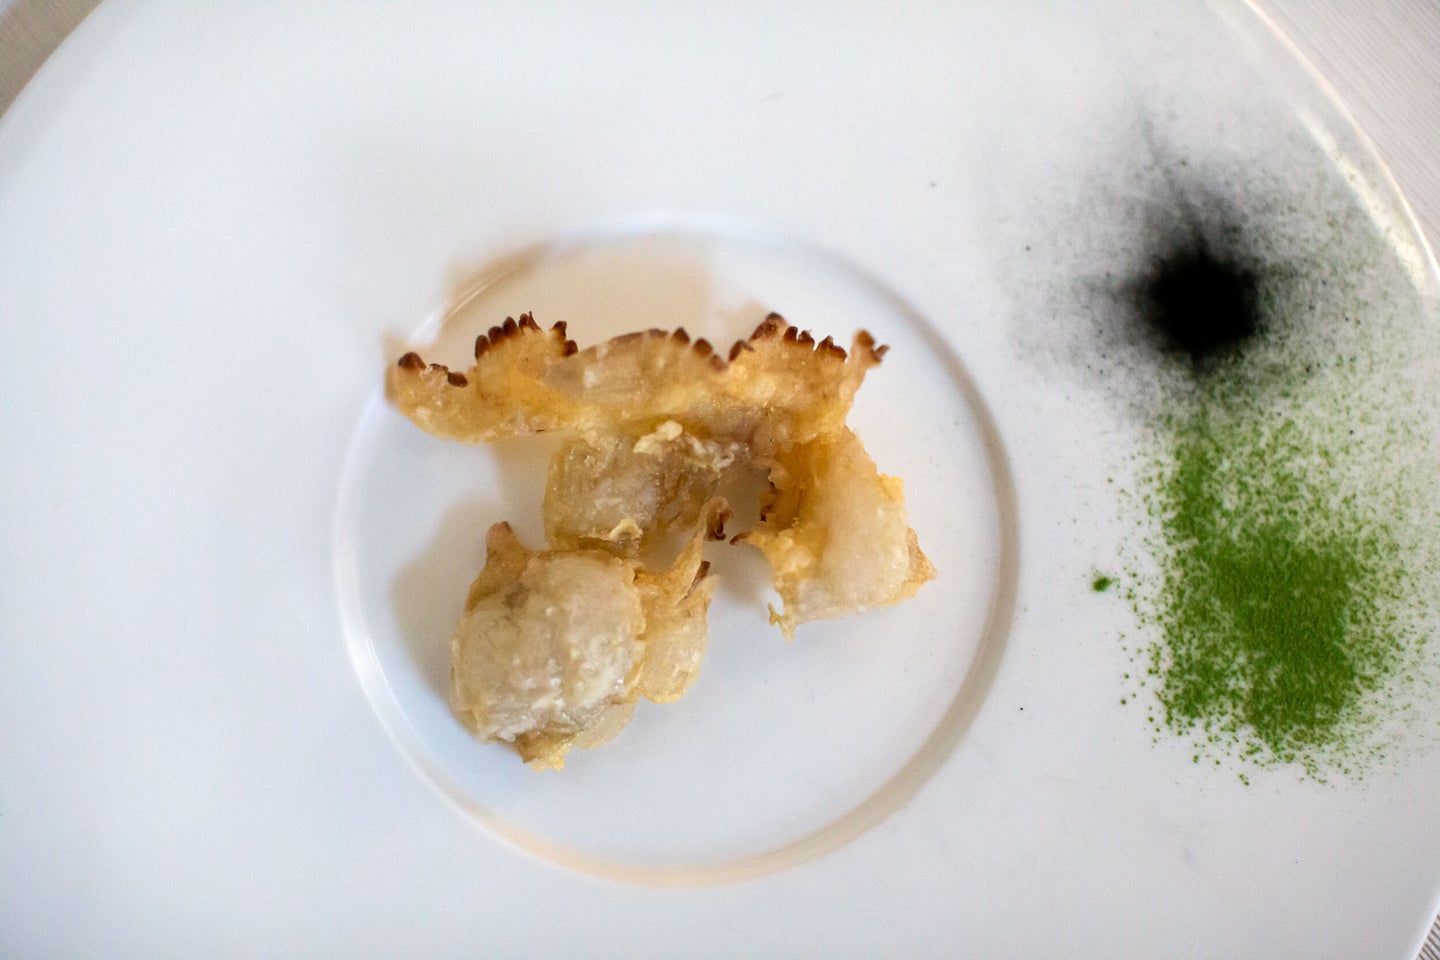 Jellyfish have been touted as a food source of the future, but finding an appetizing way to prepare them is a challenge—one that some Italian chefs are embracing.